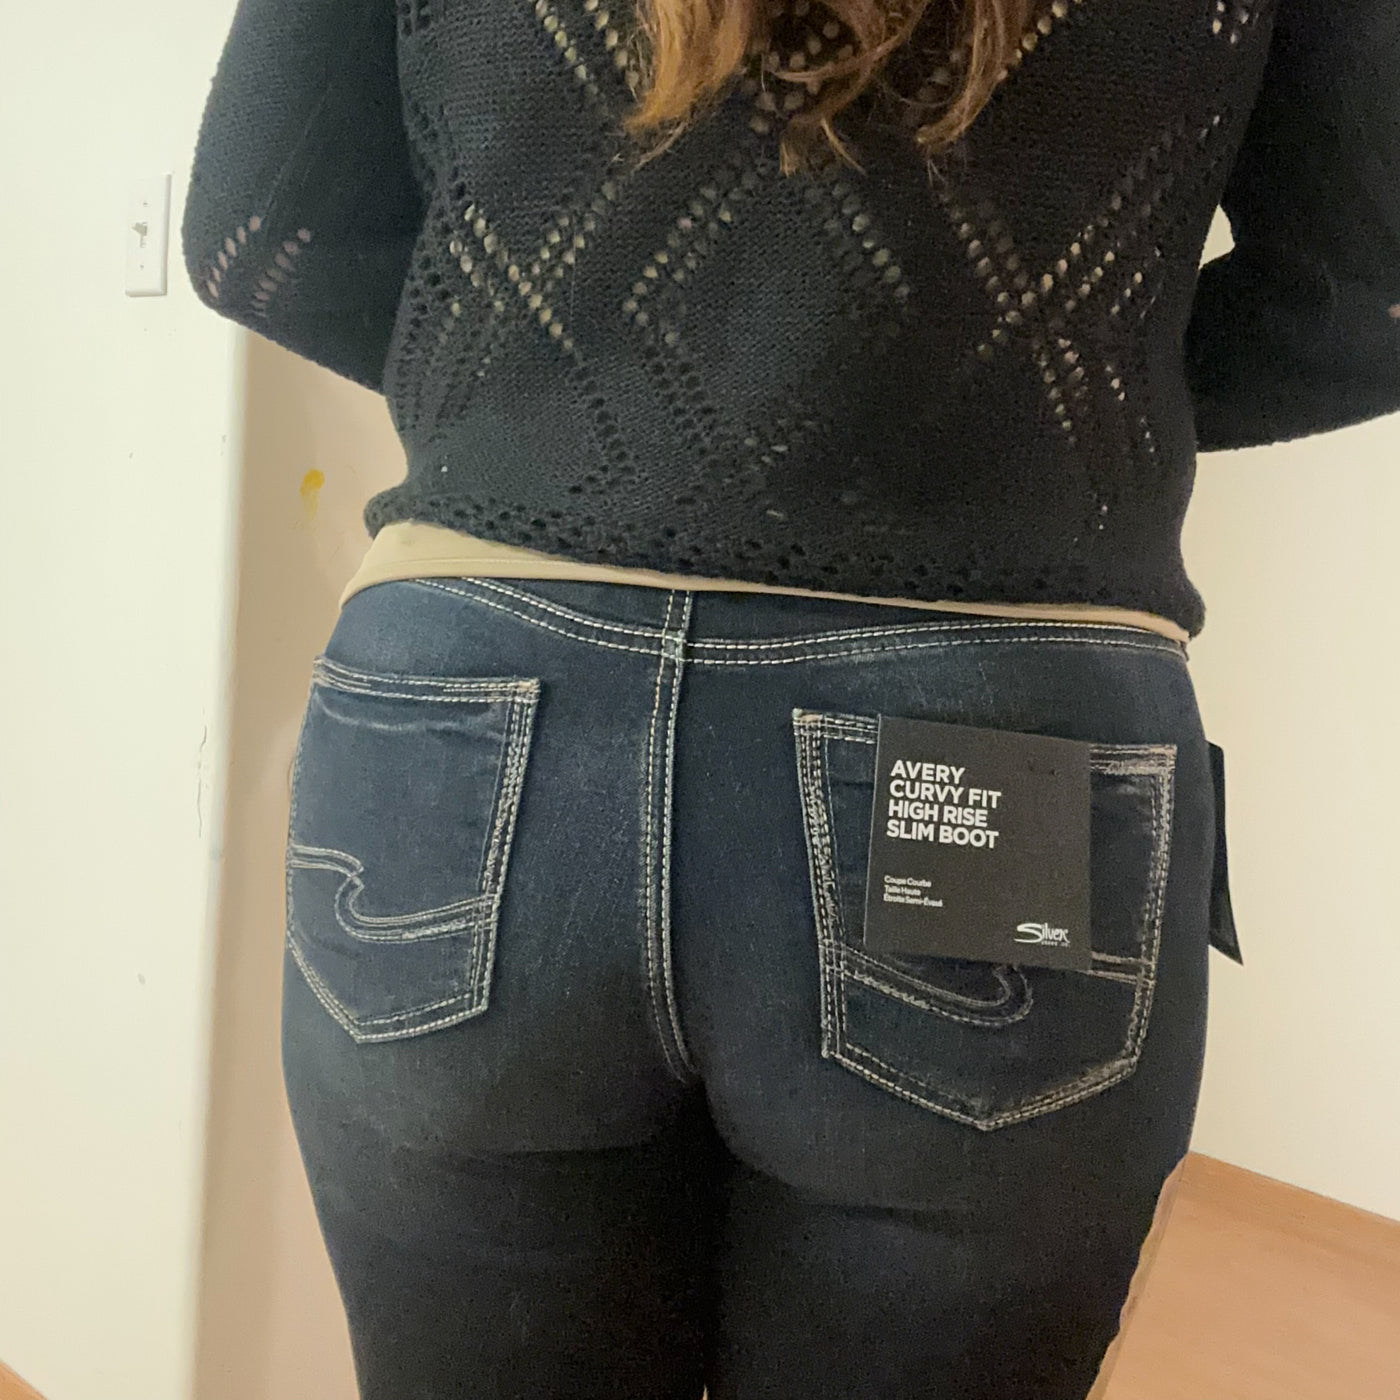 Curvy woman wearing the Avery slim boot cut jeans by silver jeans co 